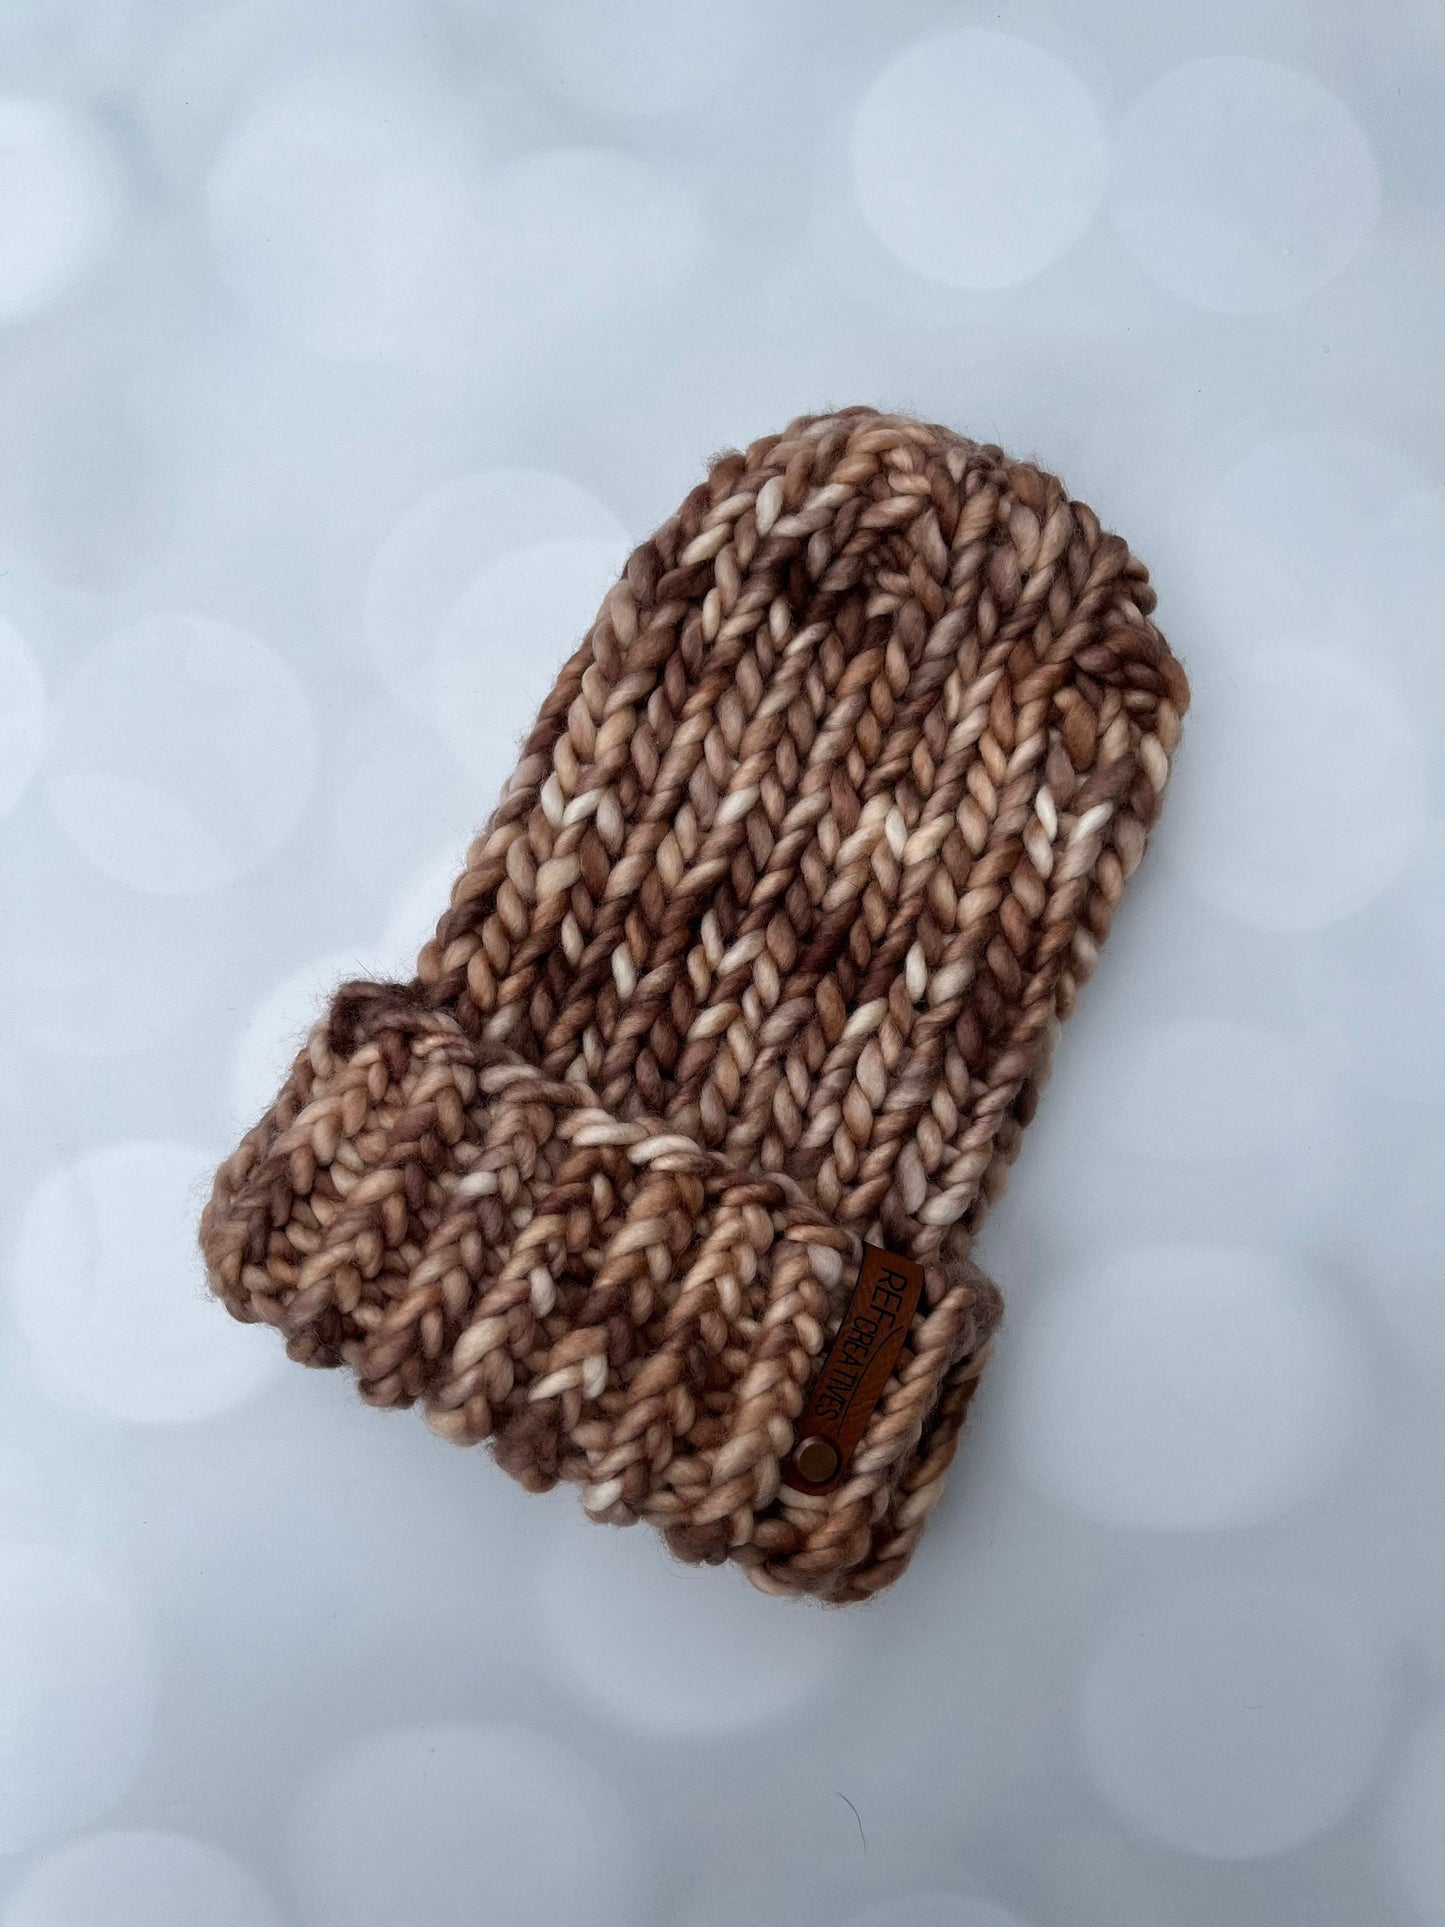 Luxury Brown Merino Wool Knit Hat - Wildwood Beanie Hand Knit Hat with Hand Dyed Yarn